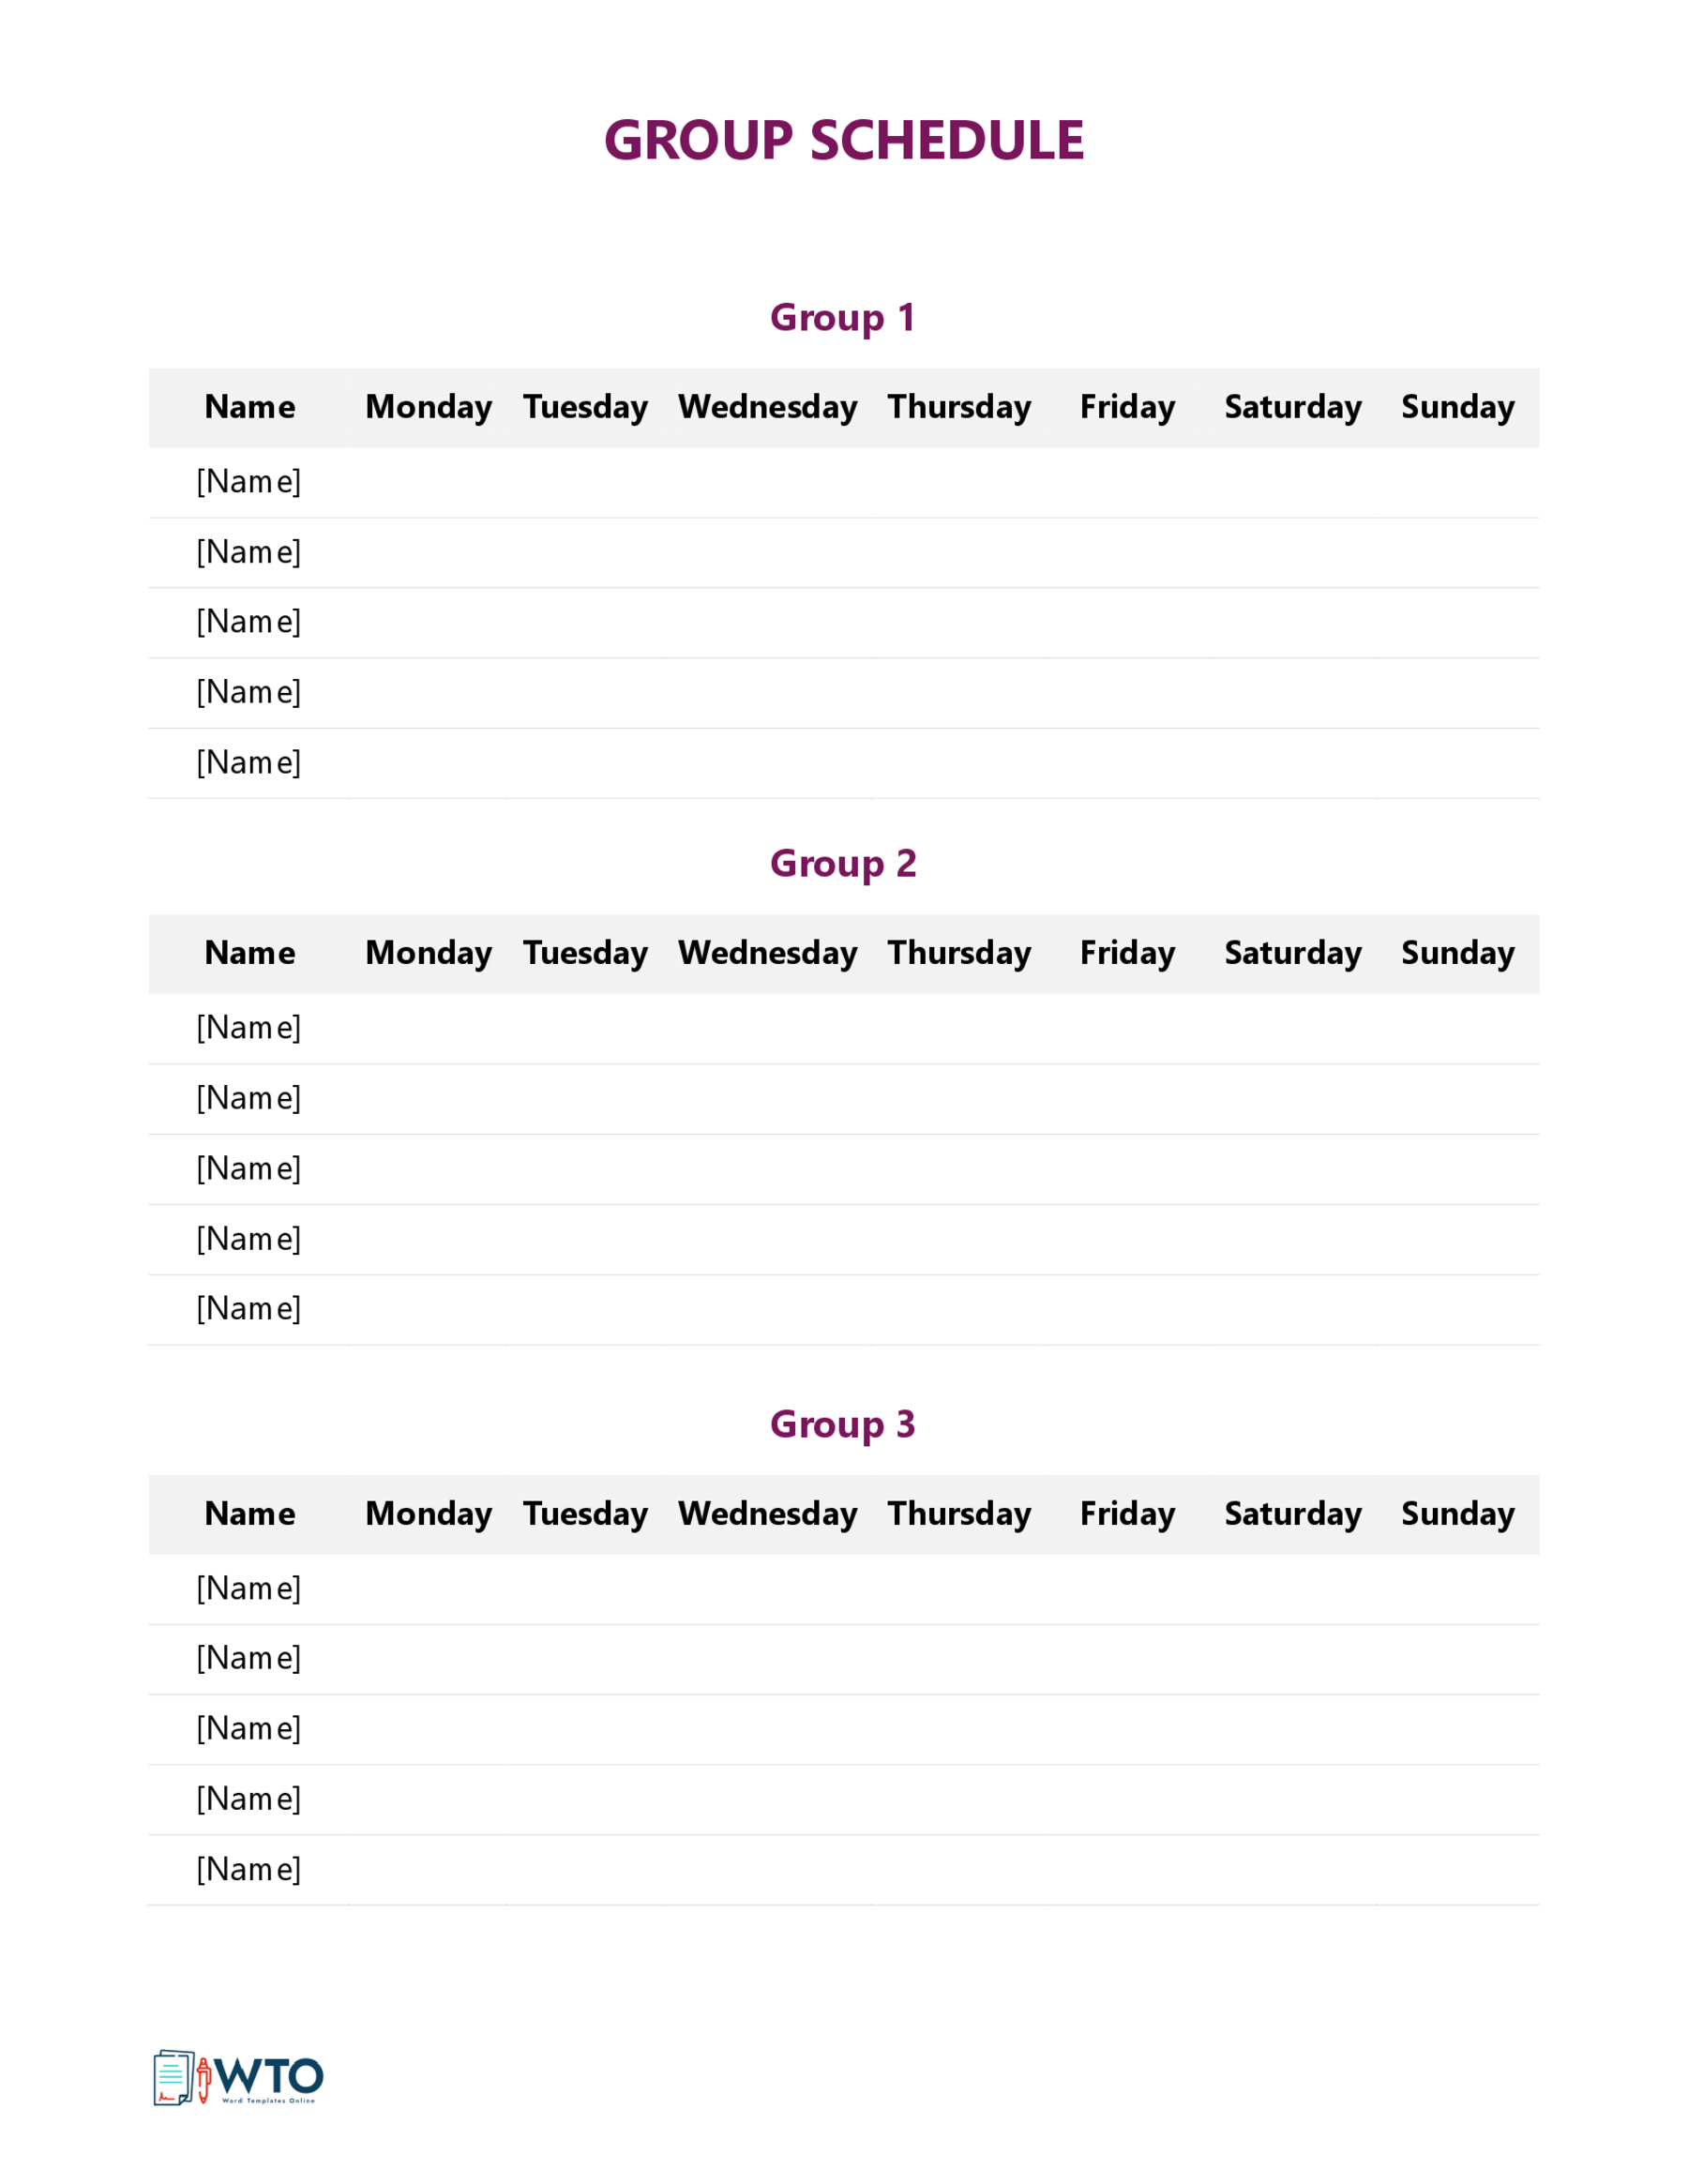 Group Schedules Example - Sample Document